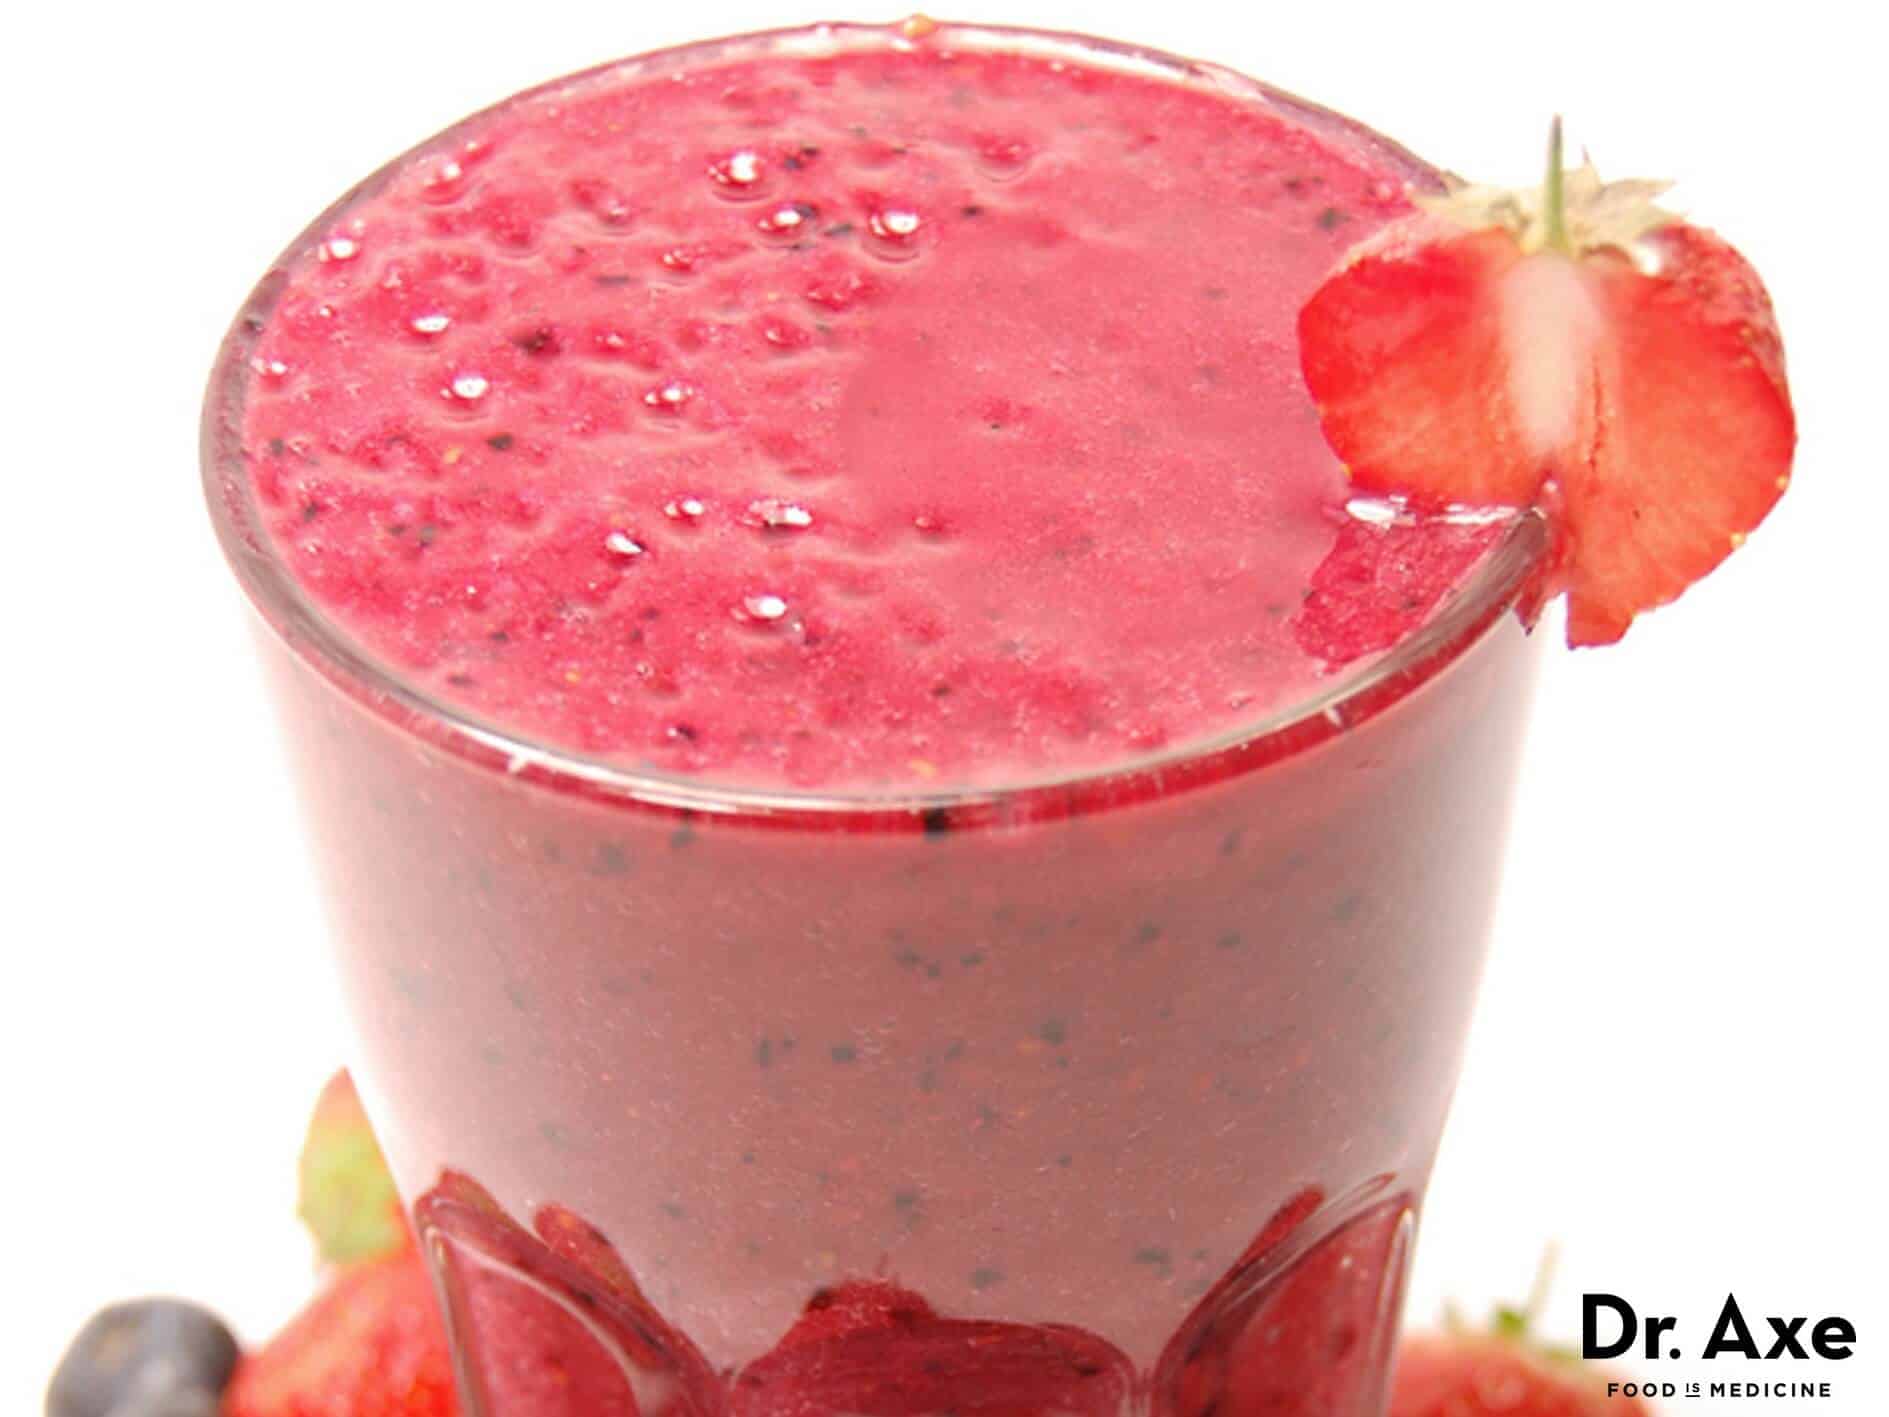 Berry protein smoothie recipe - Dr. Axe